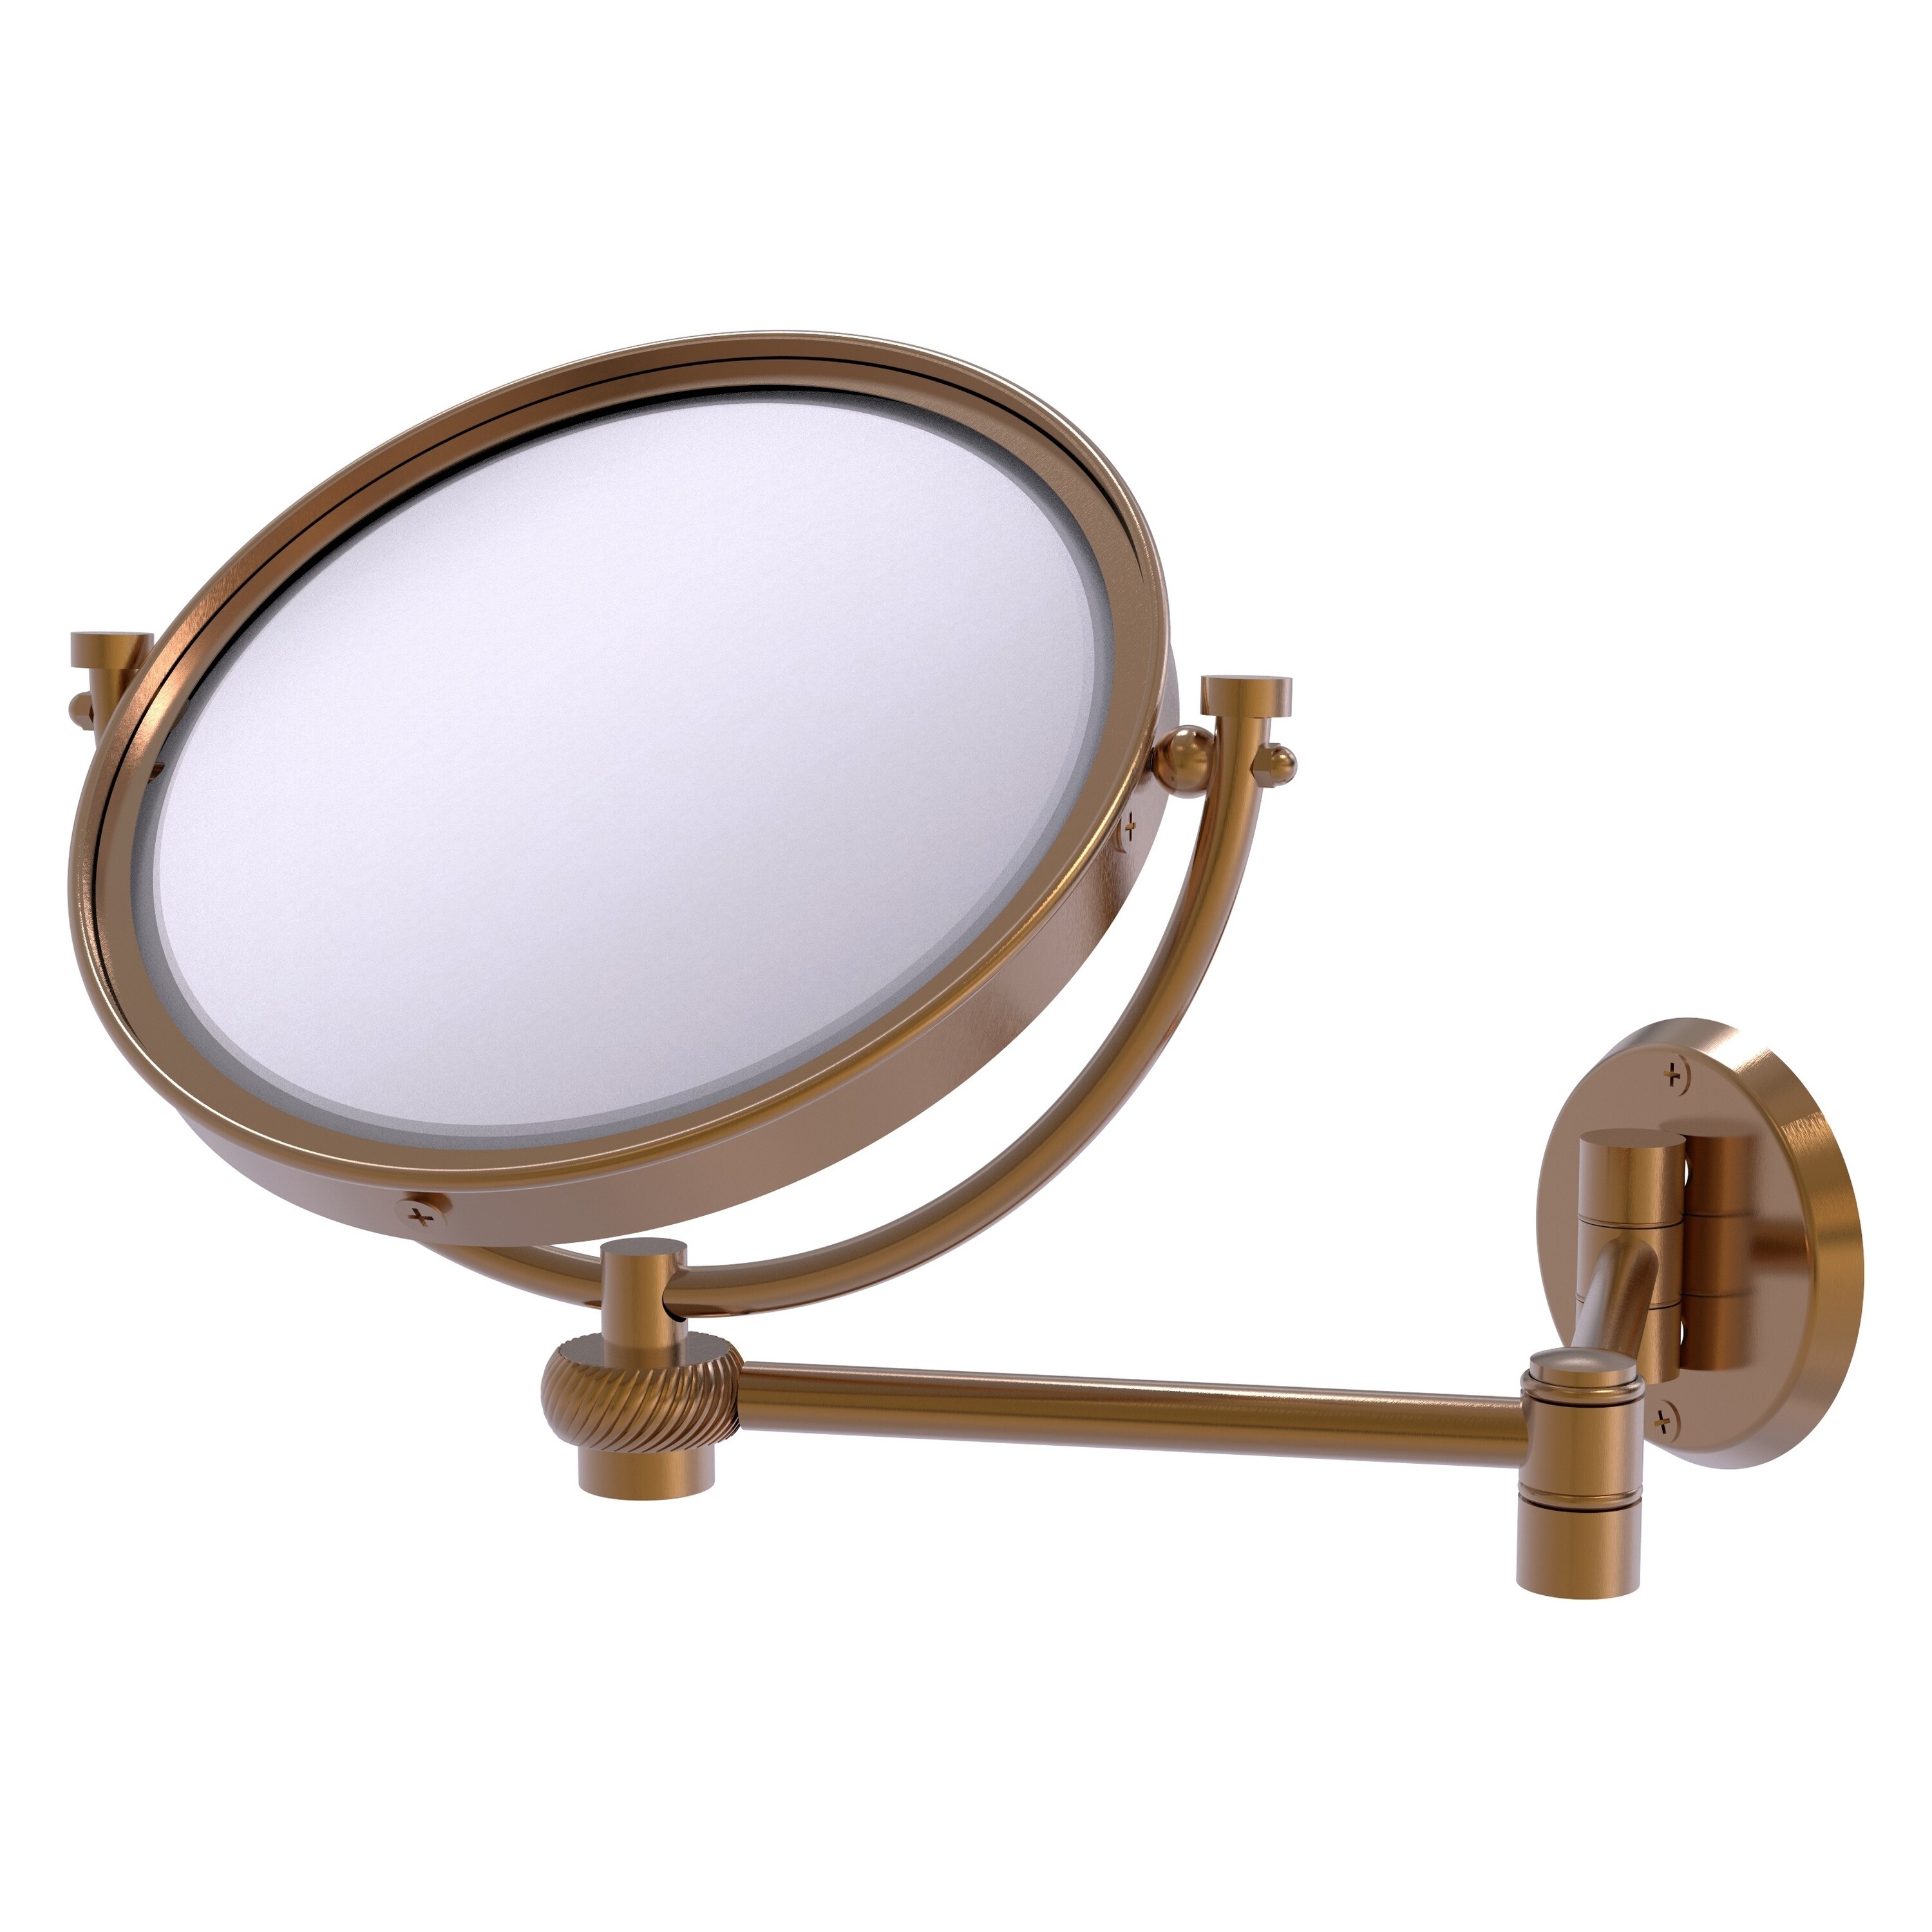 8-in x 10-in Brushed Copper Double-sided 5X Magnifying Wall-mounted Vanity Mirror | - Allied Brass WM-6T/5X-BBR